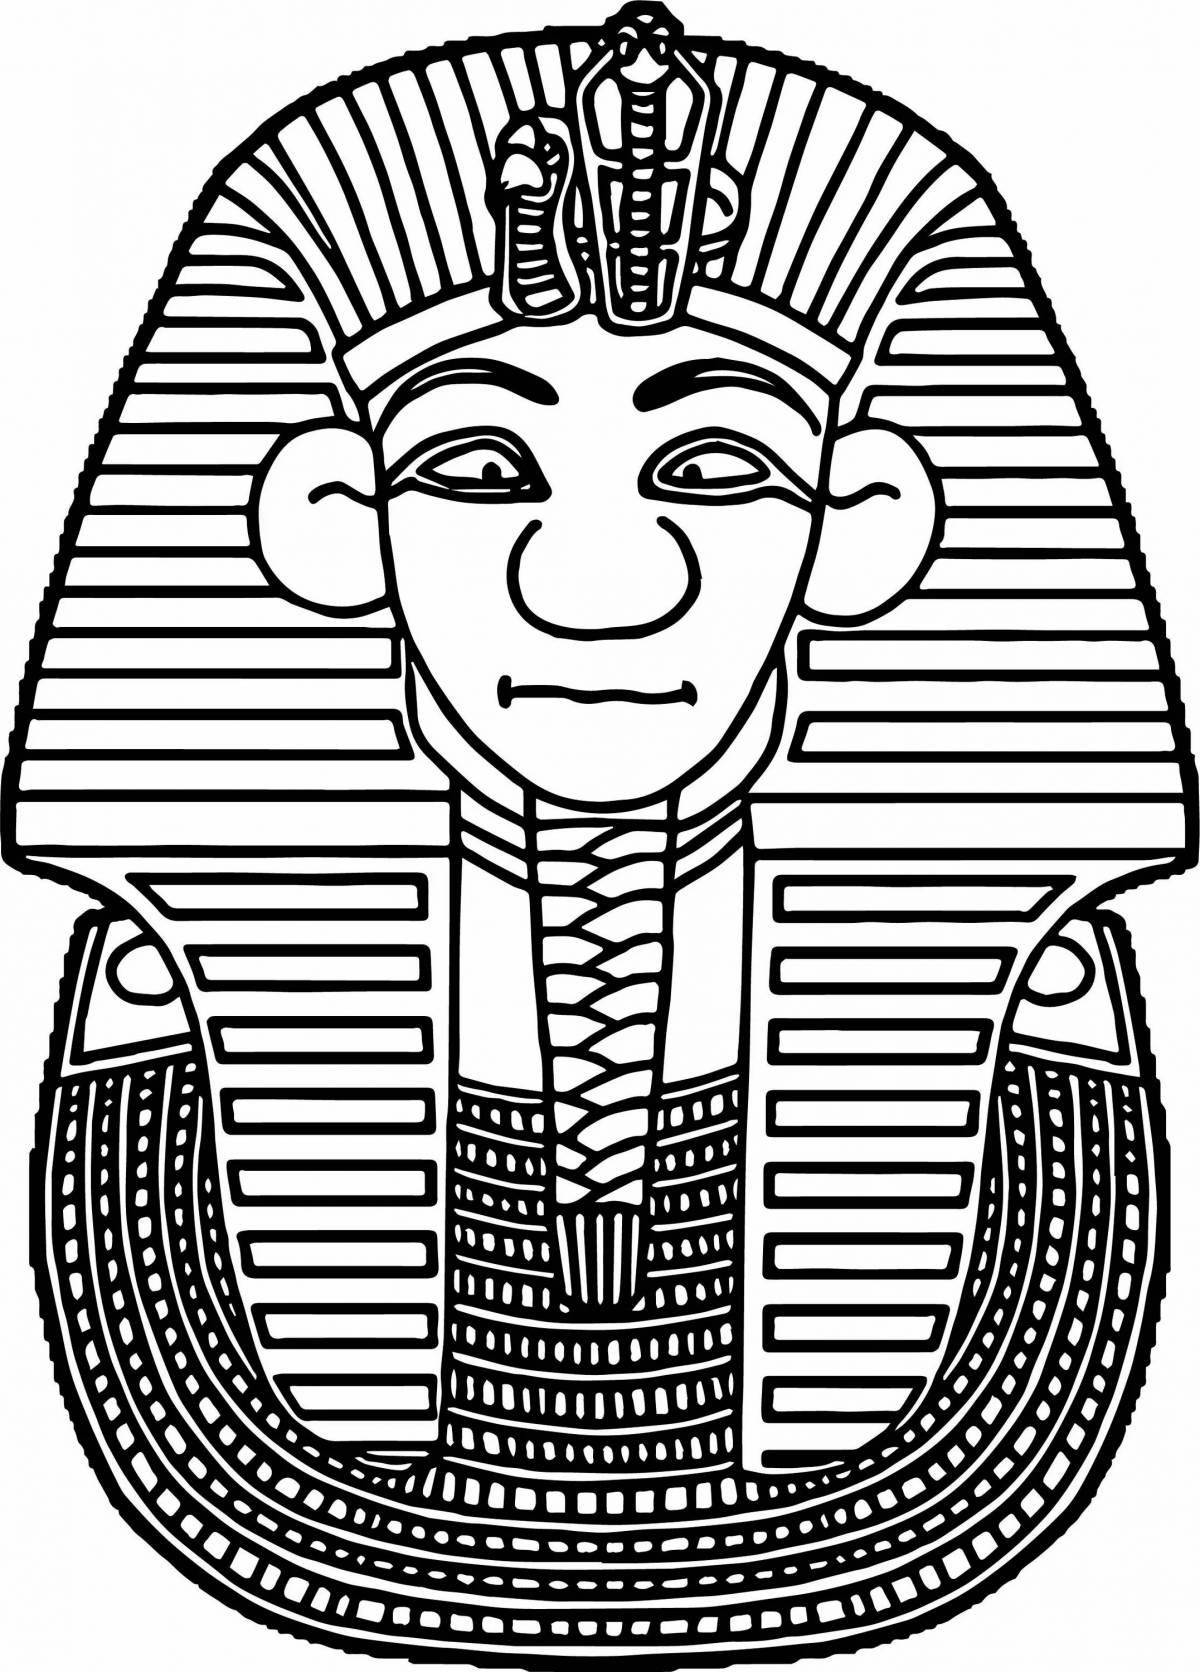 Coloring page bright mask of the pharaoh